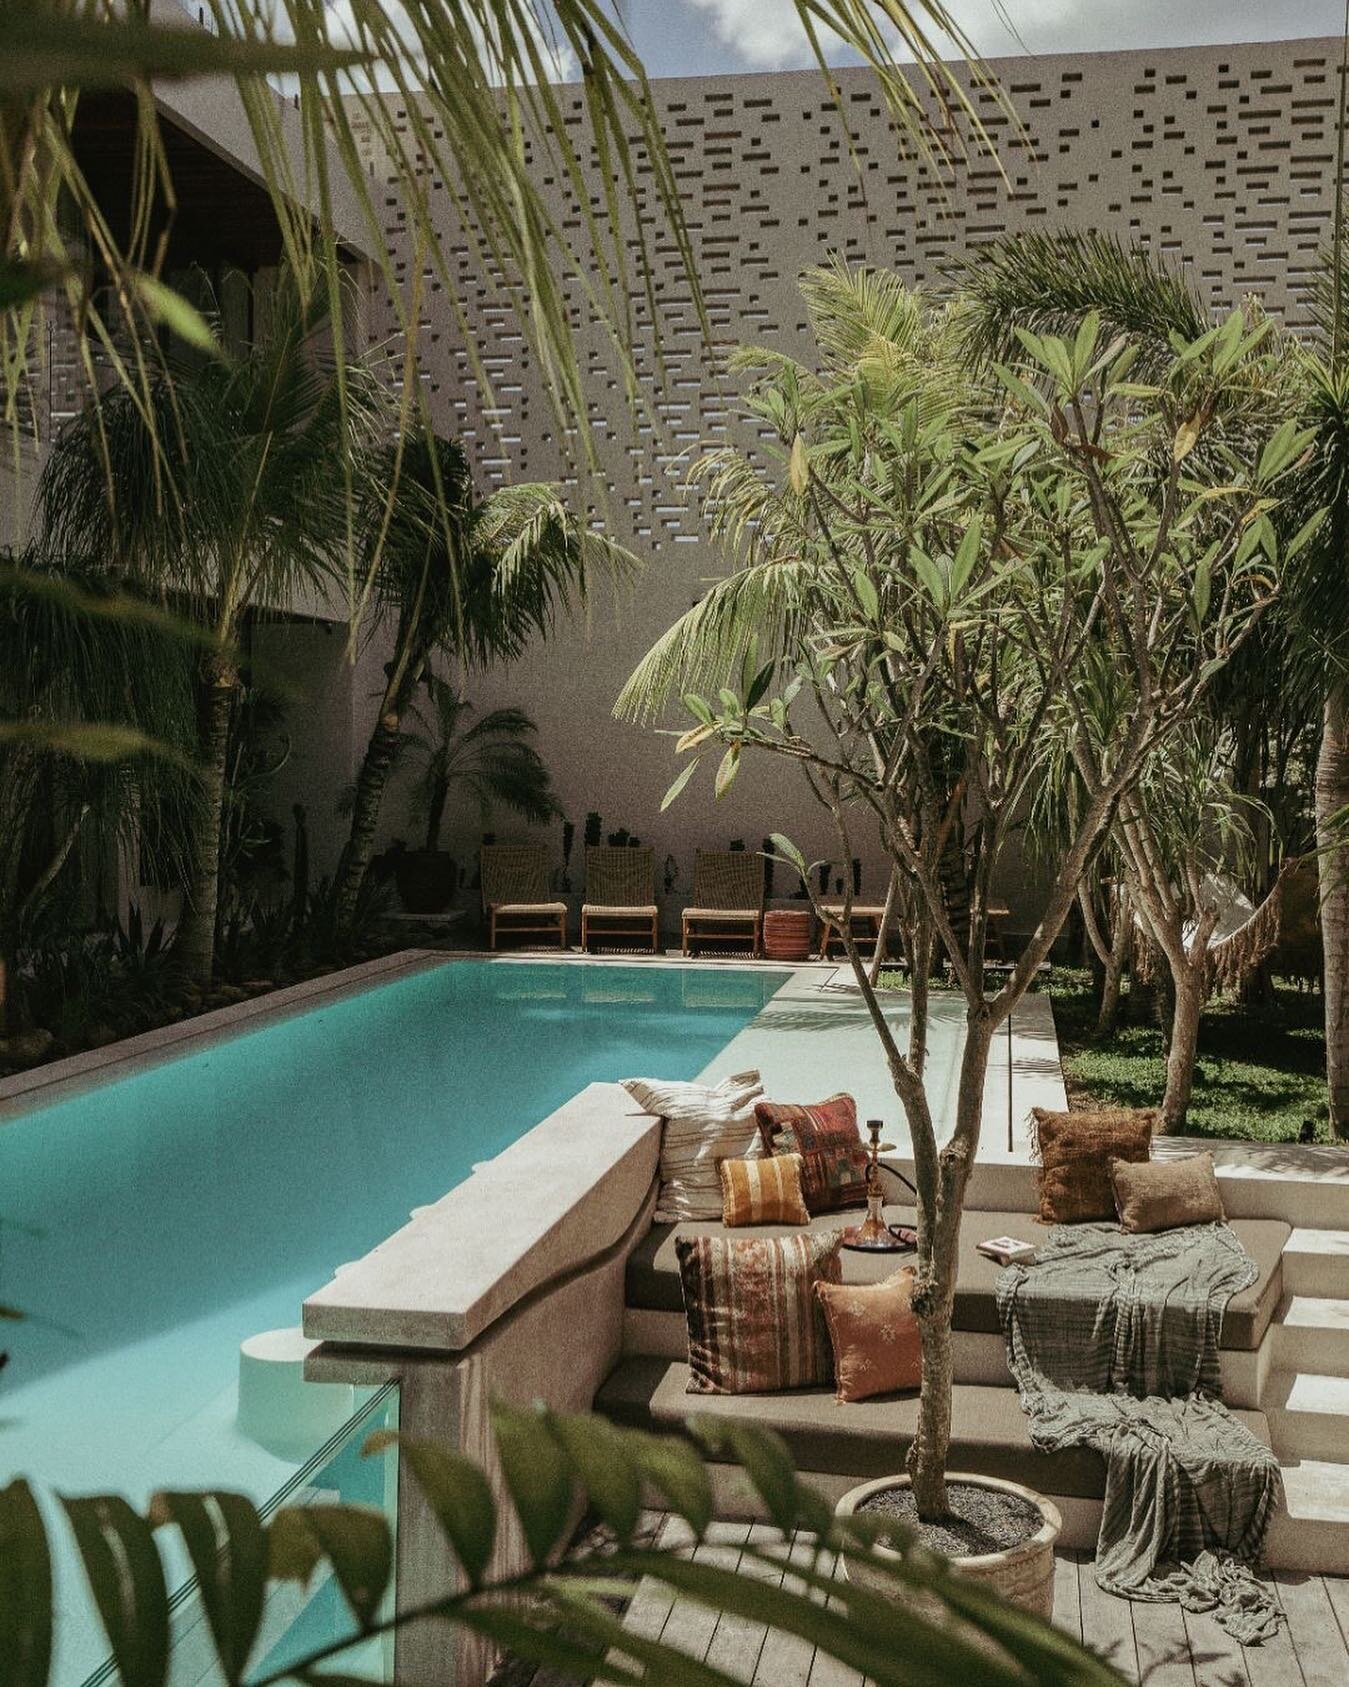 poolside lounging at @theturiyabali presents itself in various forms